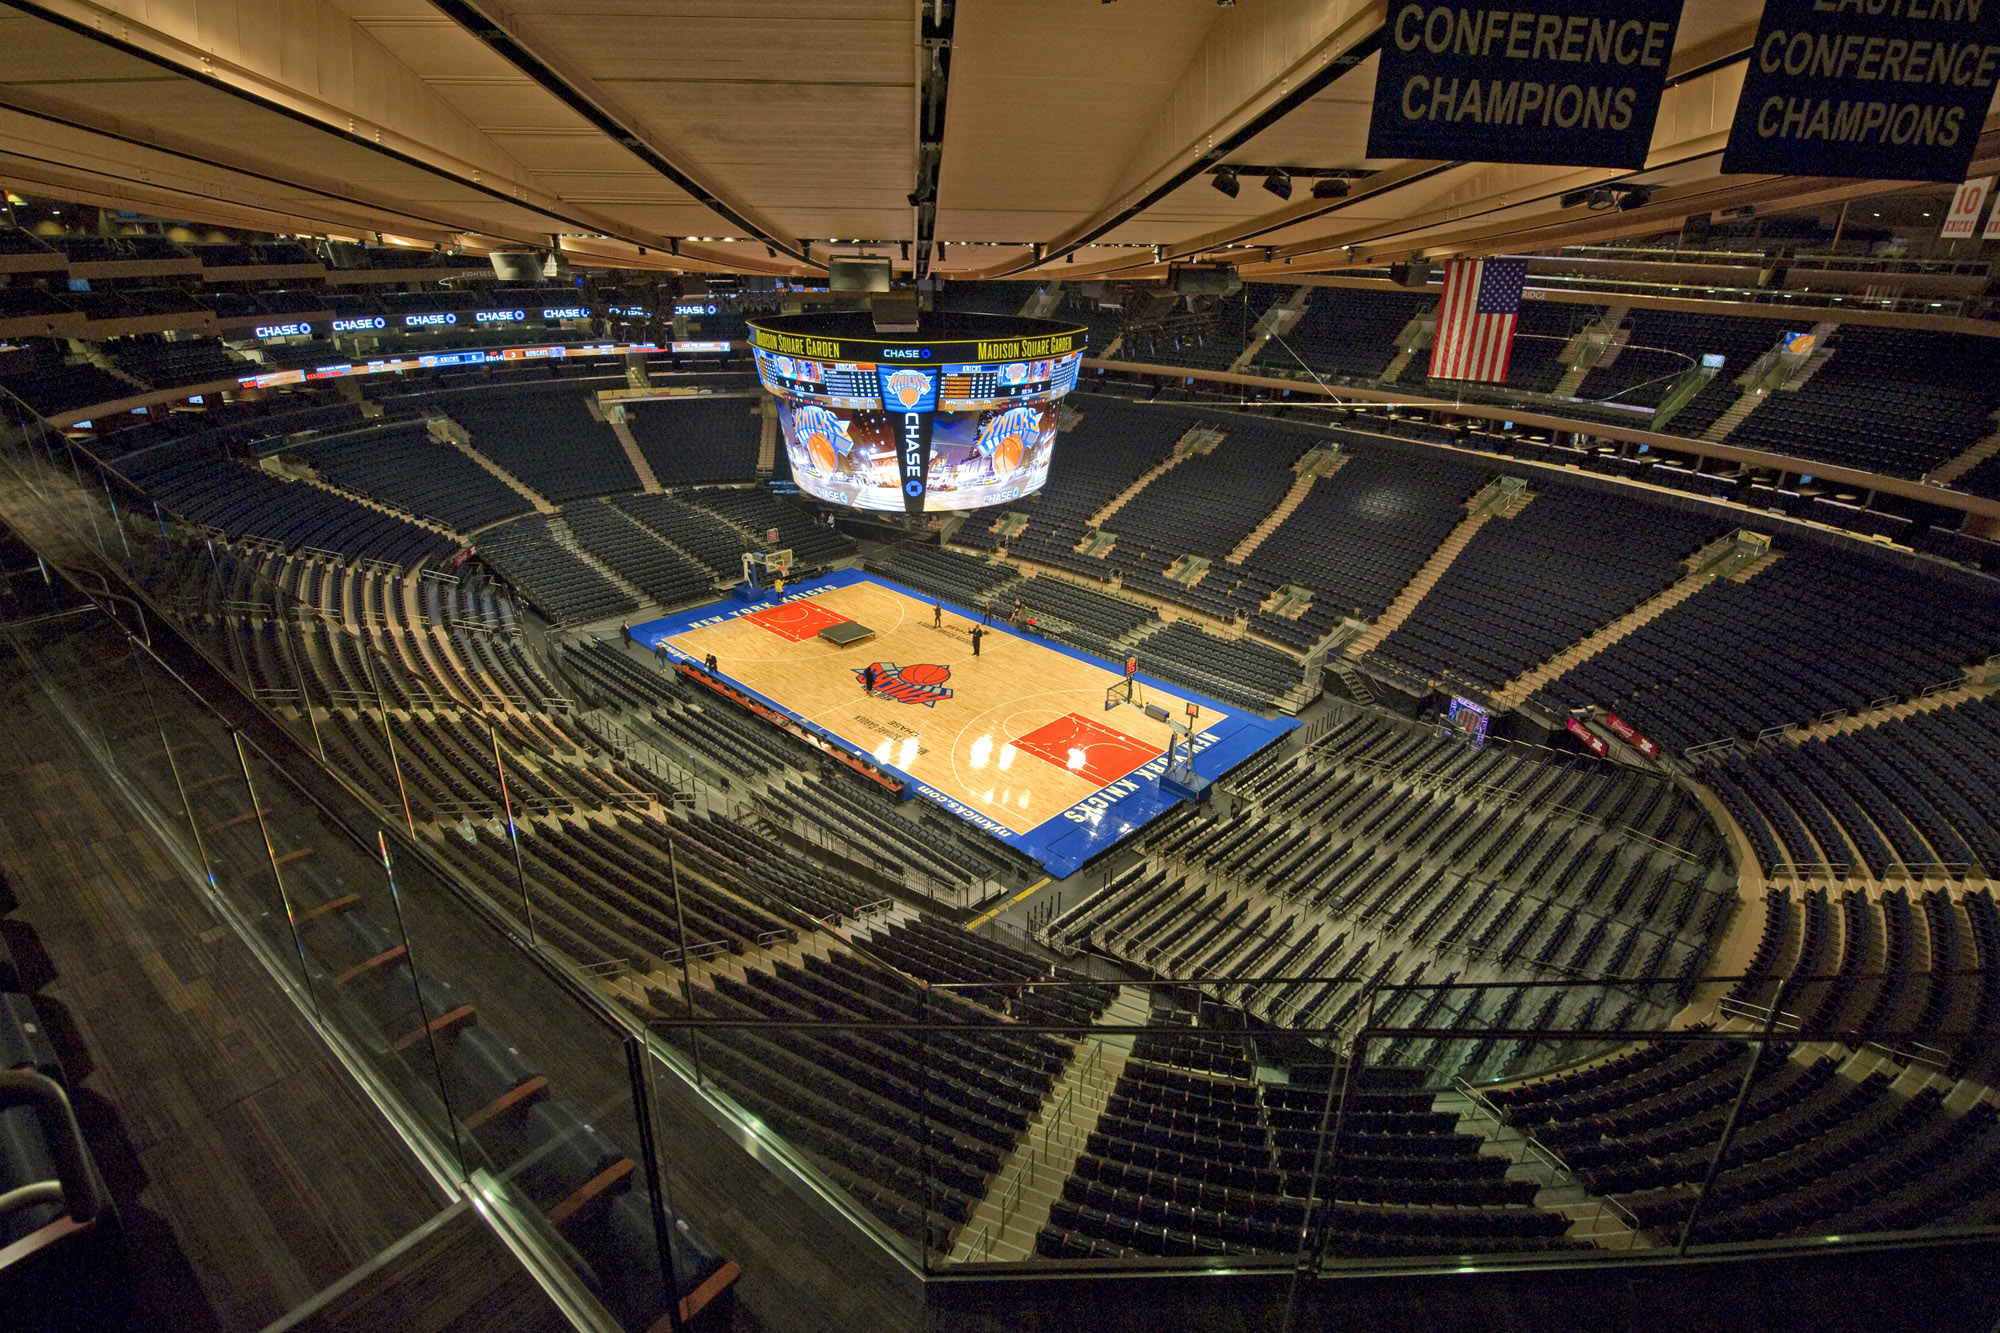 Madison Square Garden: One of The Most Magnificent Multipurpose